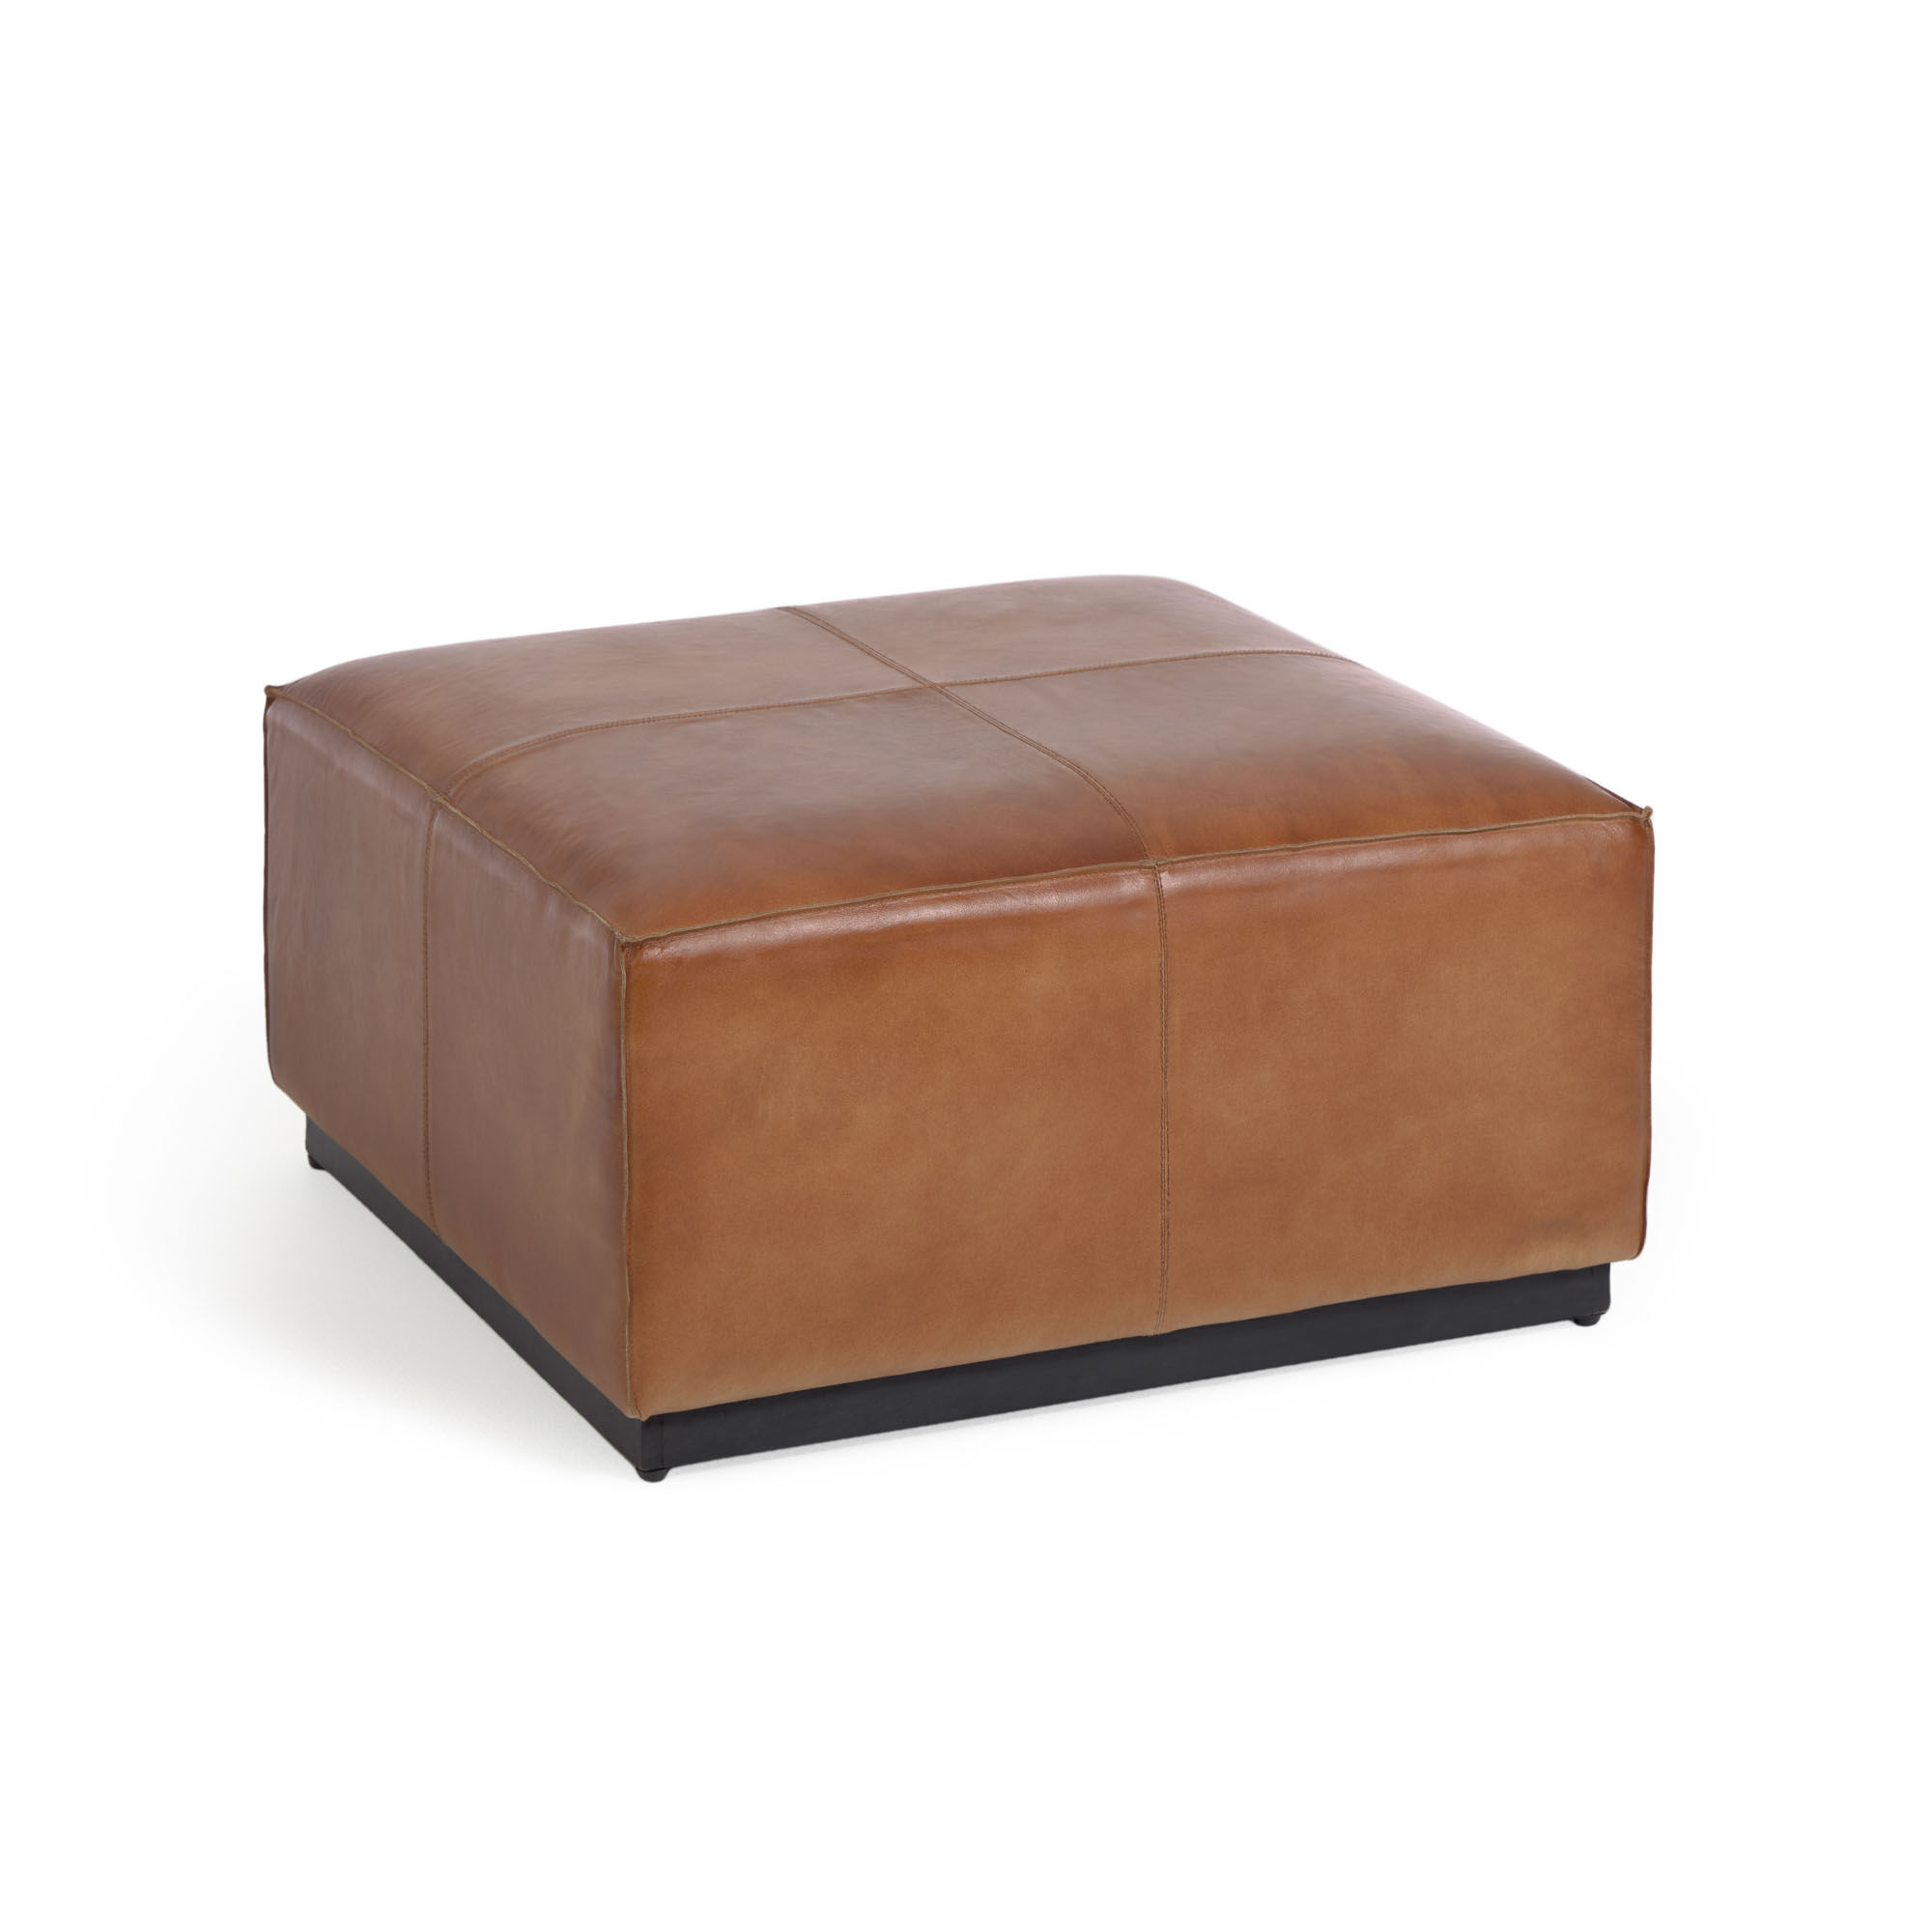 Kave Home Cesia 70 x 70 cm brown buffalo hide footstool with wooden base